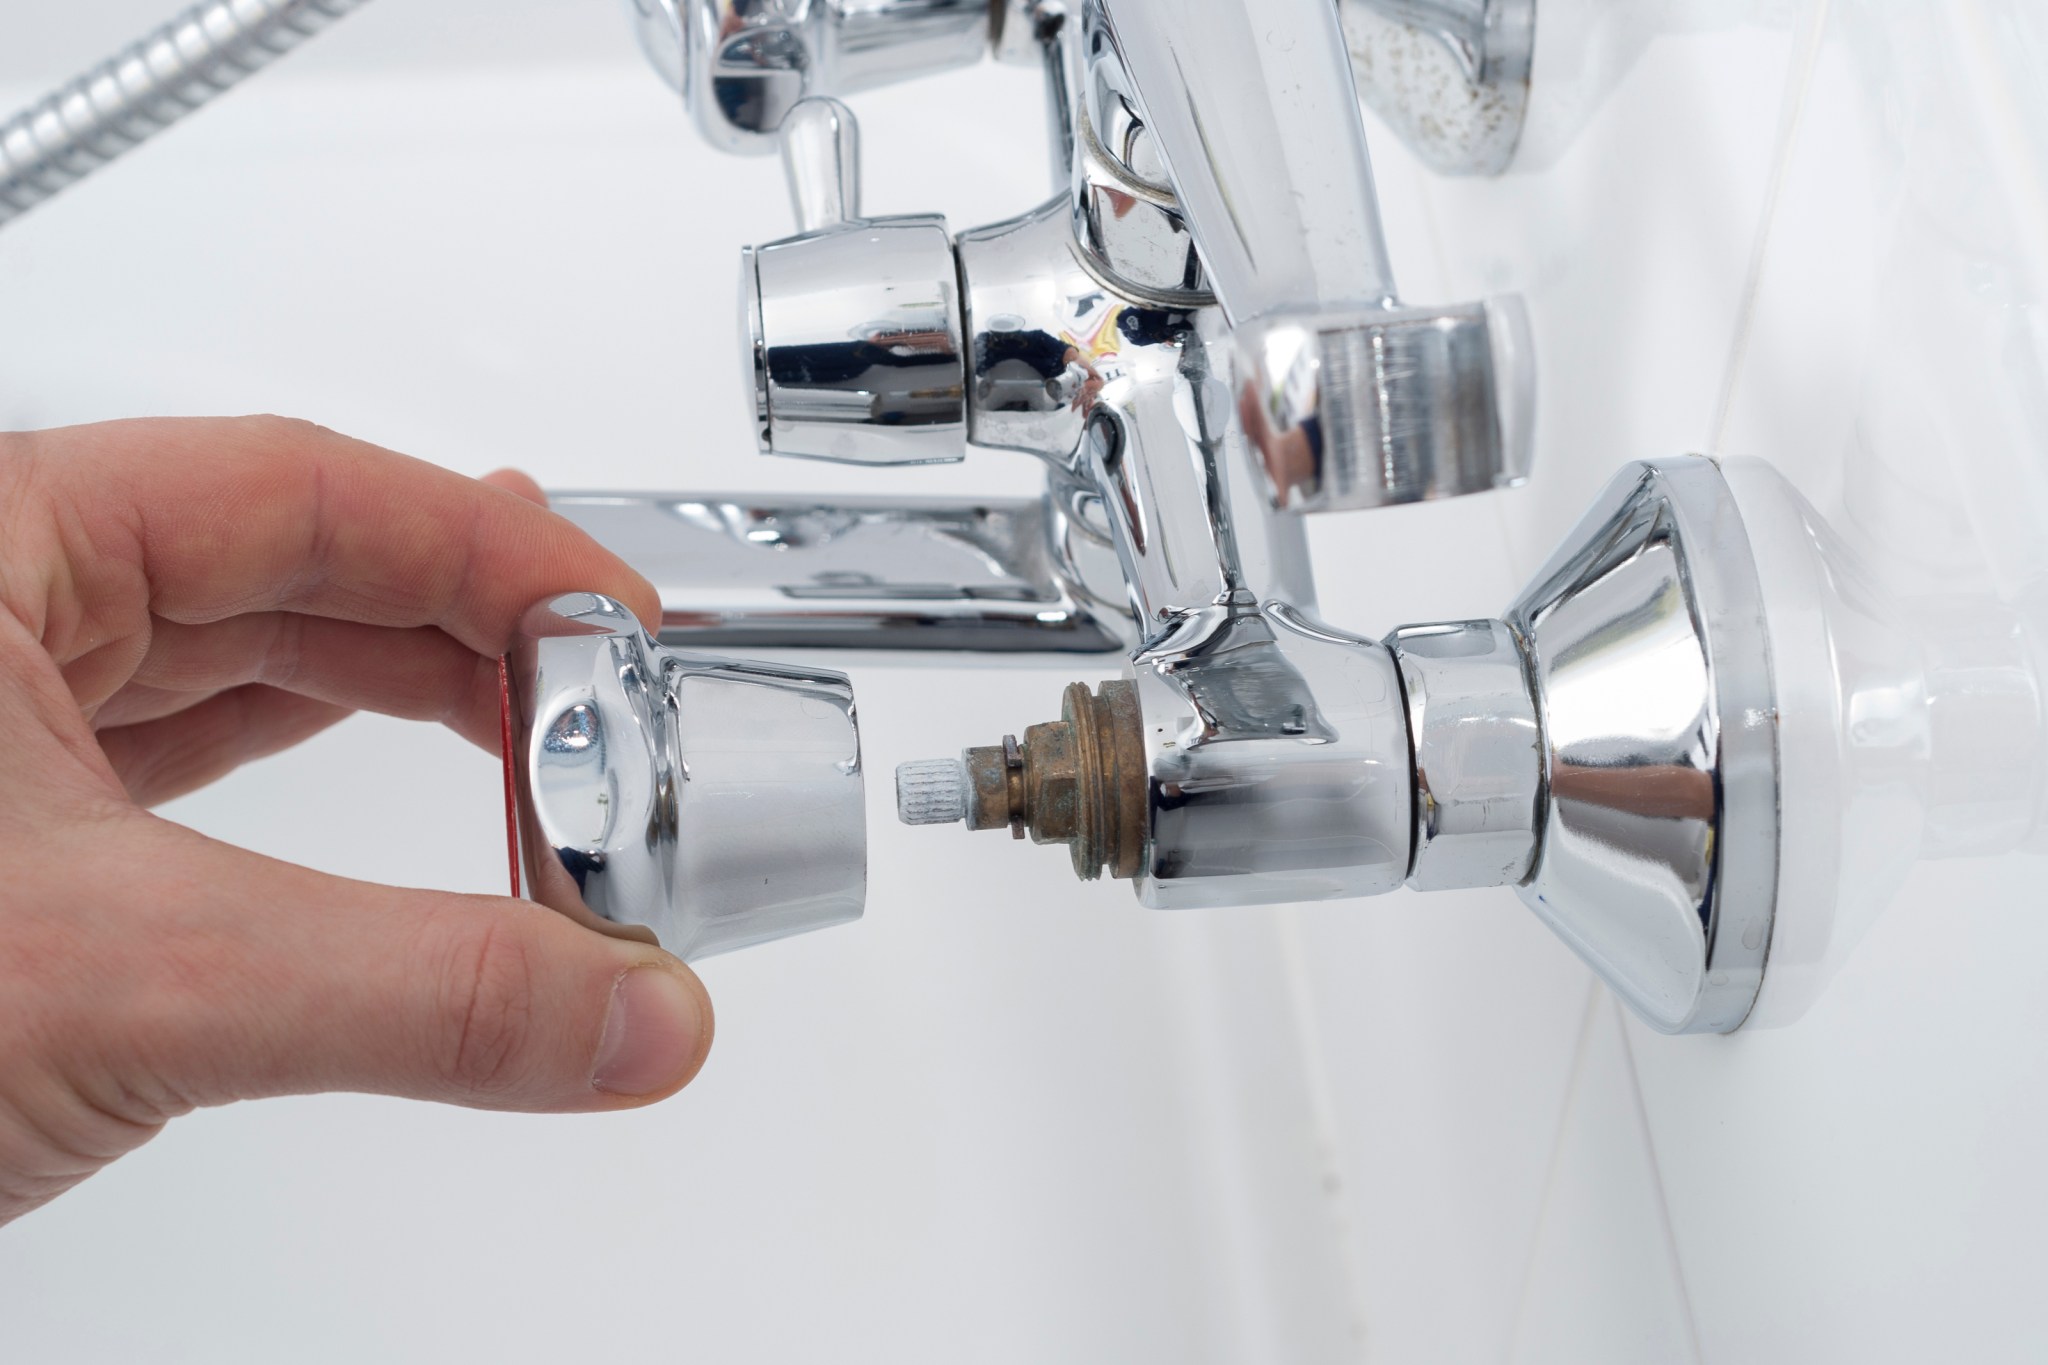 A faucet in a white bathtub being repaired as part of a shower head or shower valve replacement.